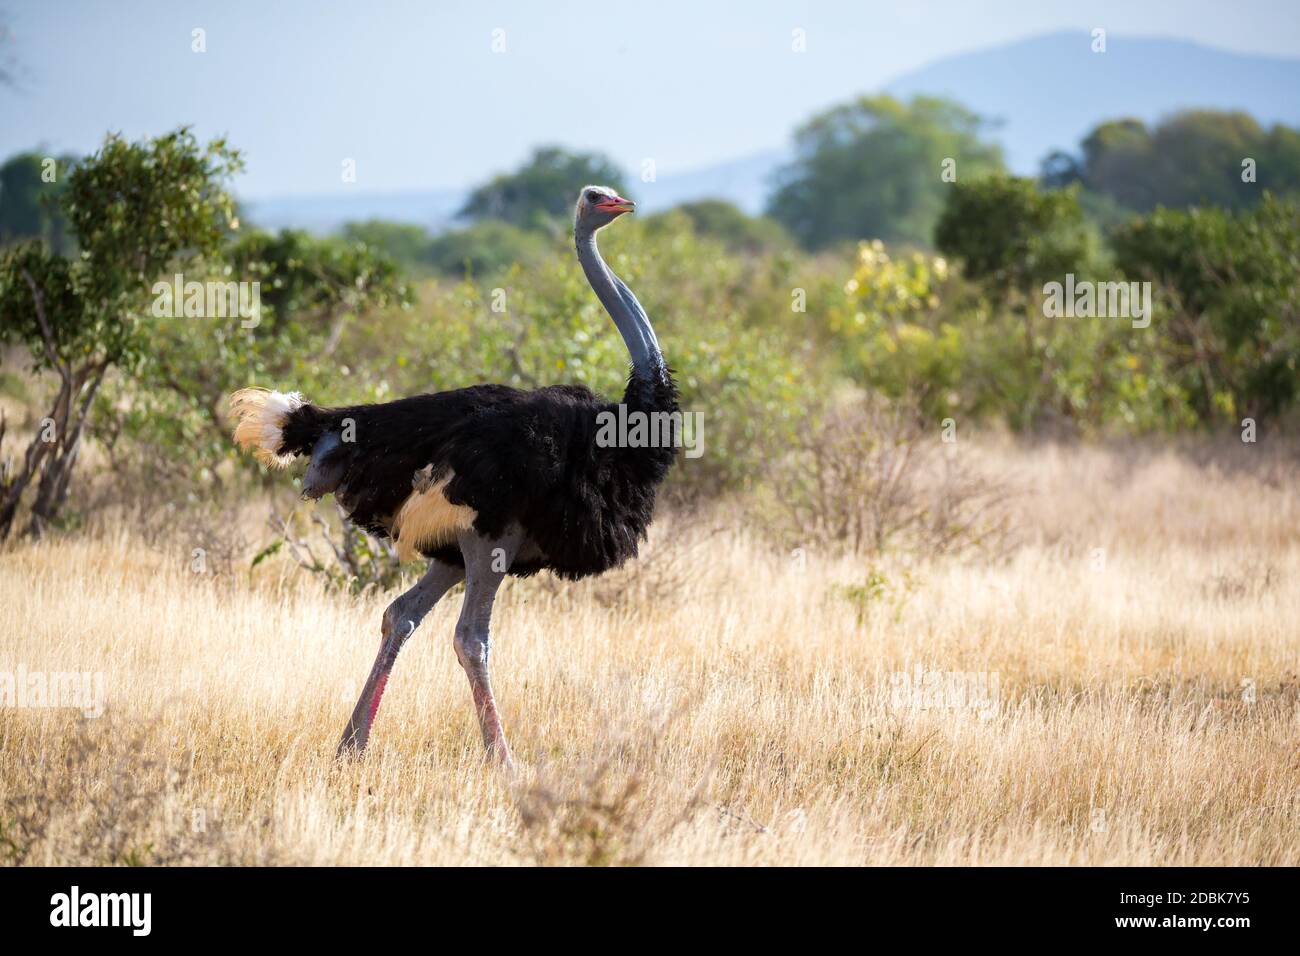 One ostrich in the landscape of the savannah in Kenya Stock Photo